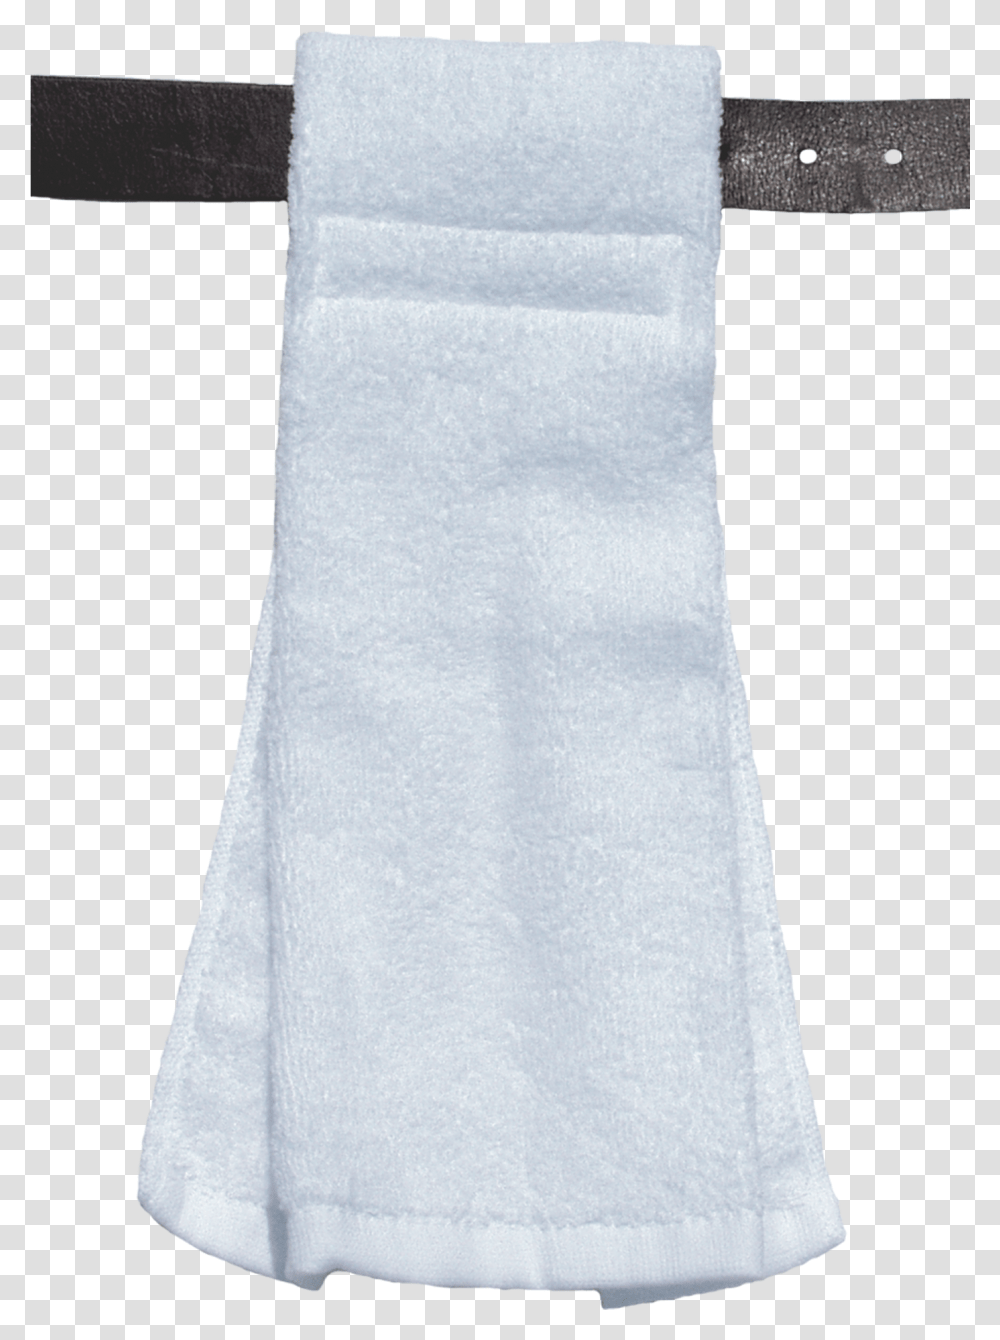 Football Field Towel White Football Towel White Football Towel, Clothing, Apparel, Rug, Scarf Transparent Png